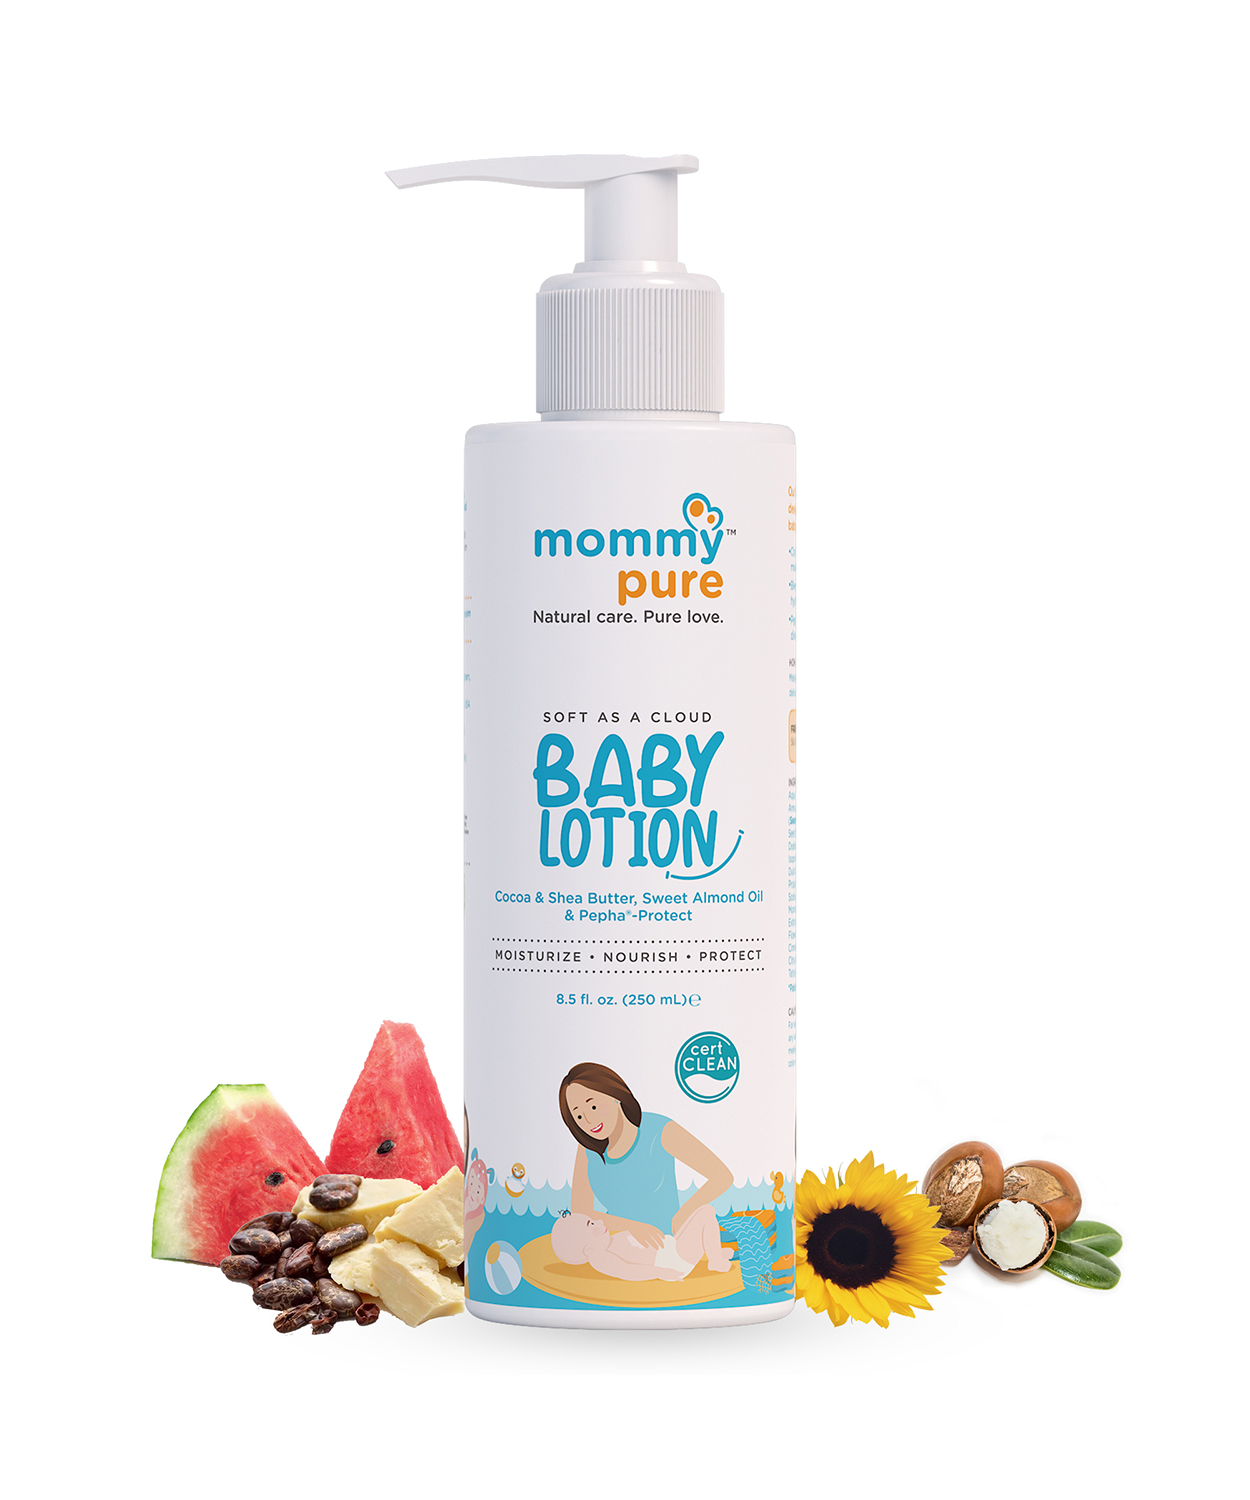 Certified Clean & Natural Baby Lotion 250ml With Cocoa & Shea Butter Toxin-Free & Dermatologically Tested |Free Of Harmful Chemicals, Gently Moisturizes & Protects Baby's Delicate Skin